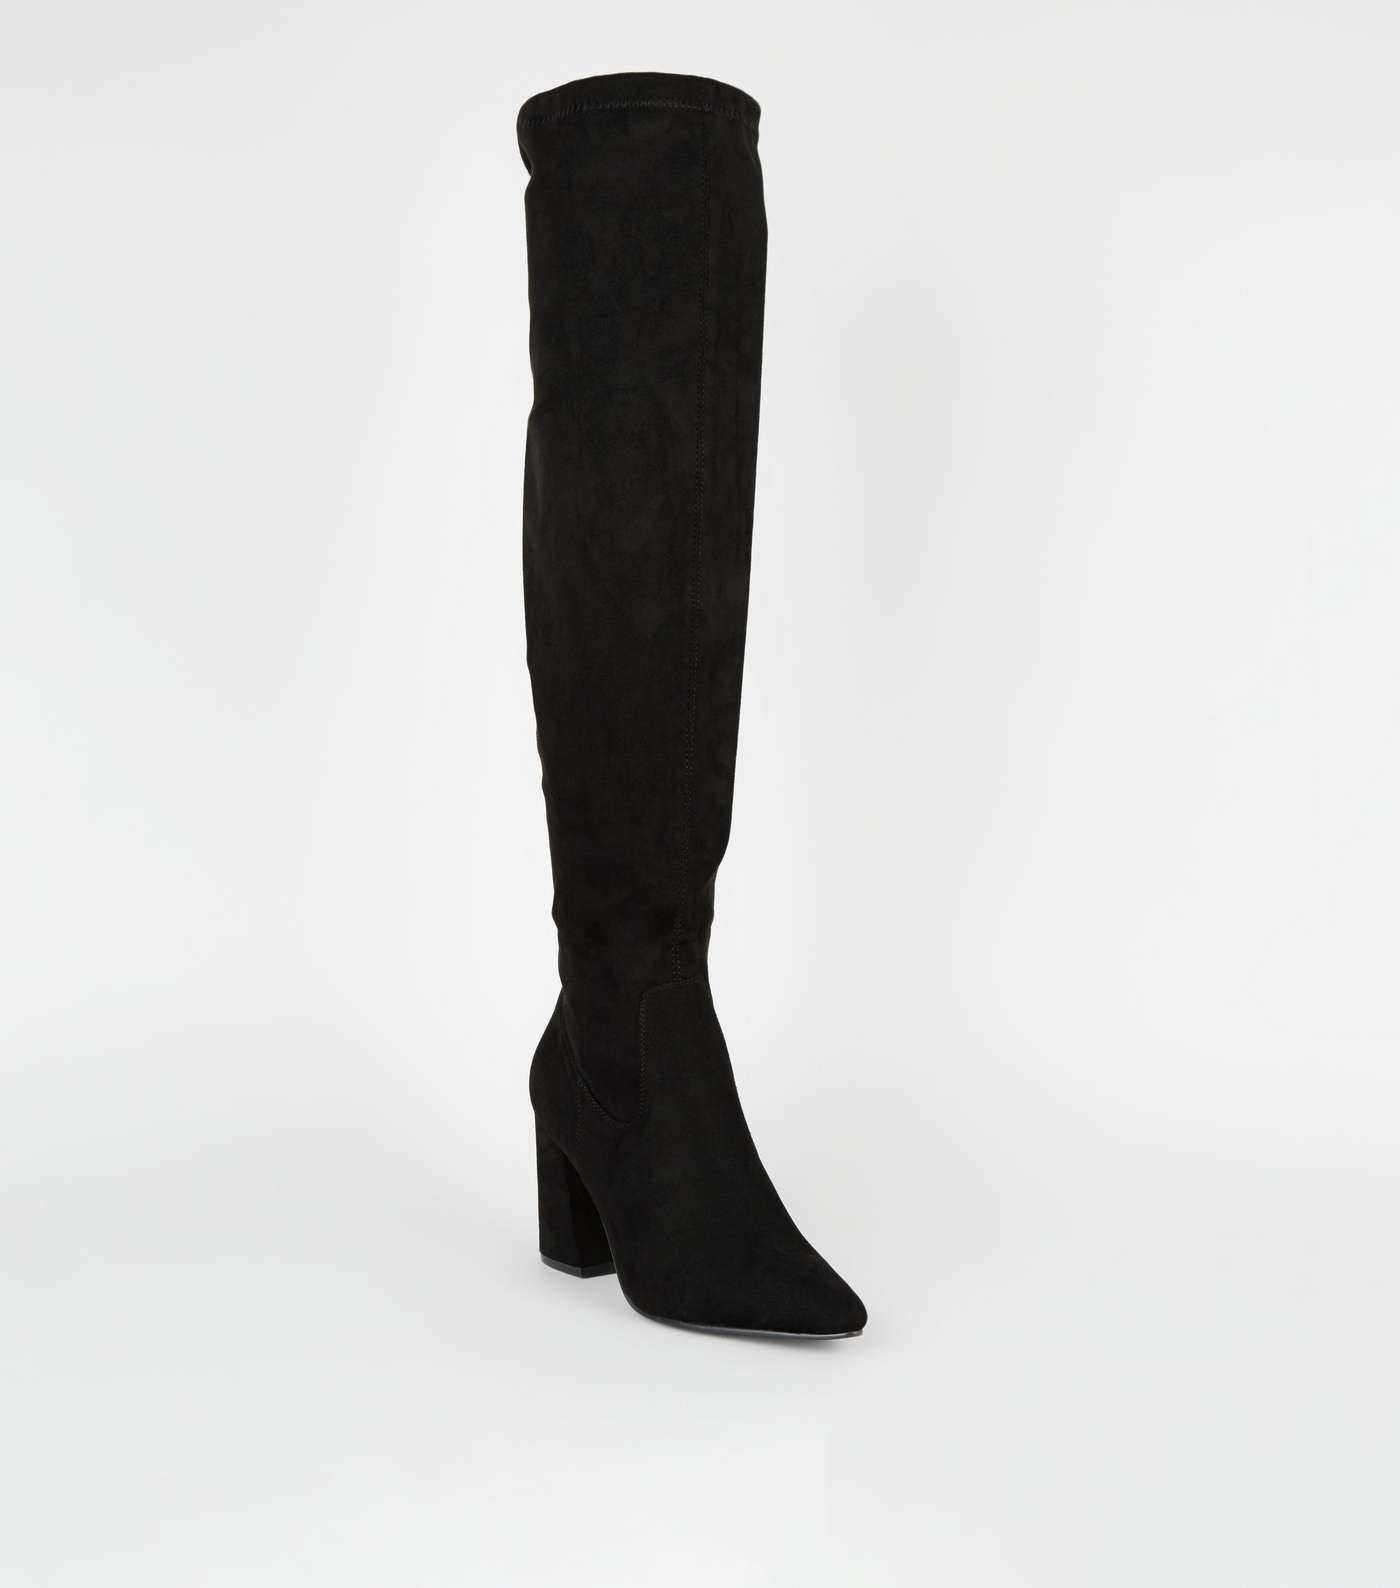 Black Suedette Over the Knee Flared Heel Boots